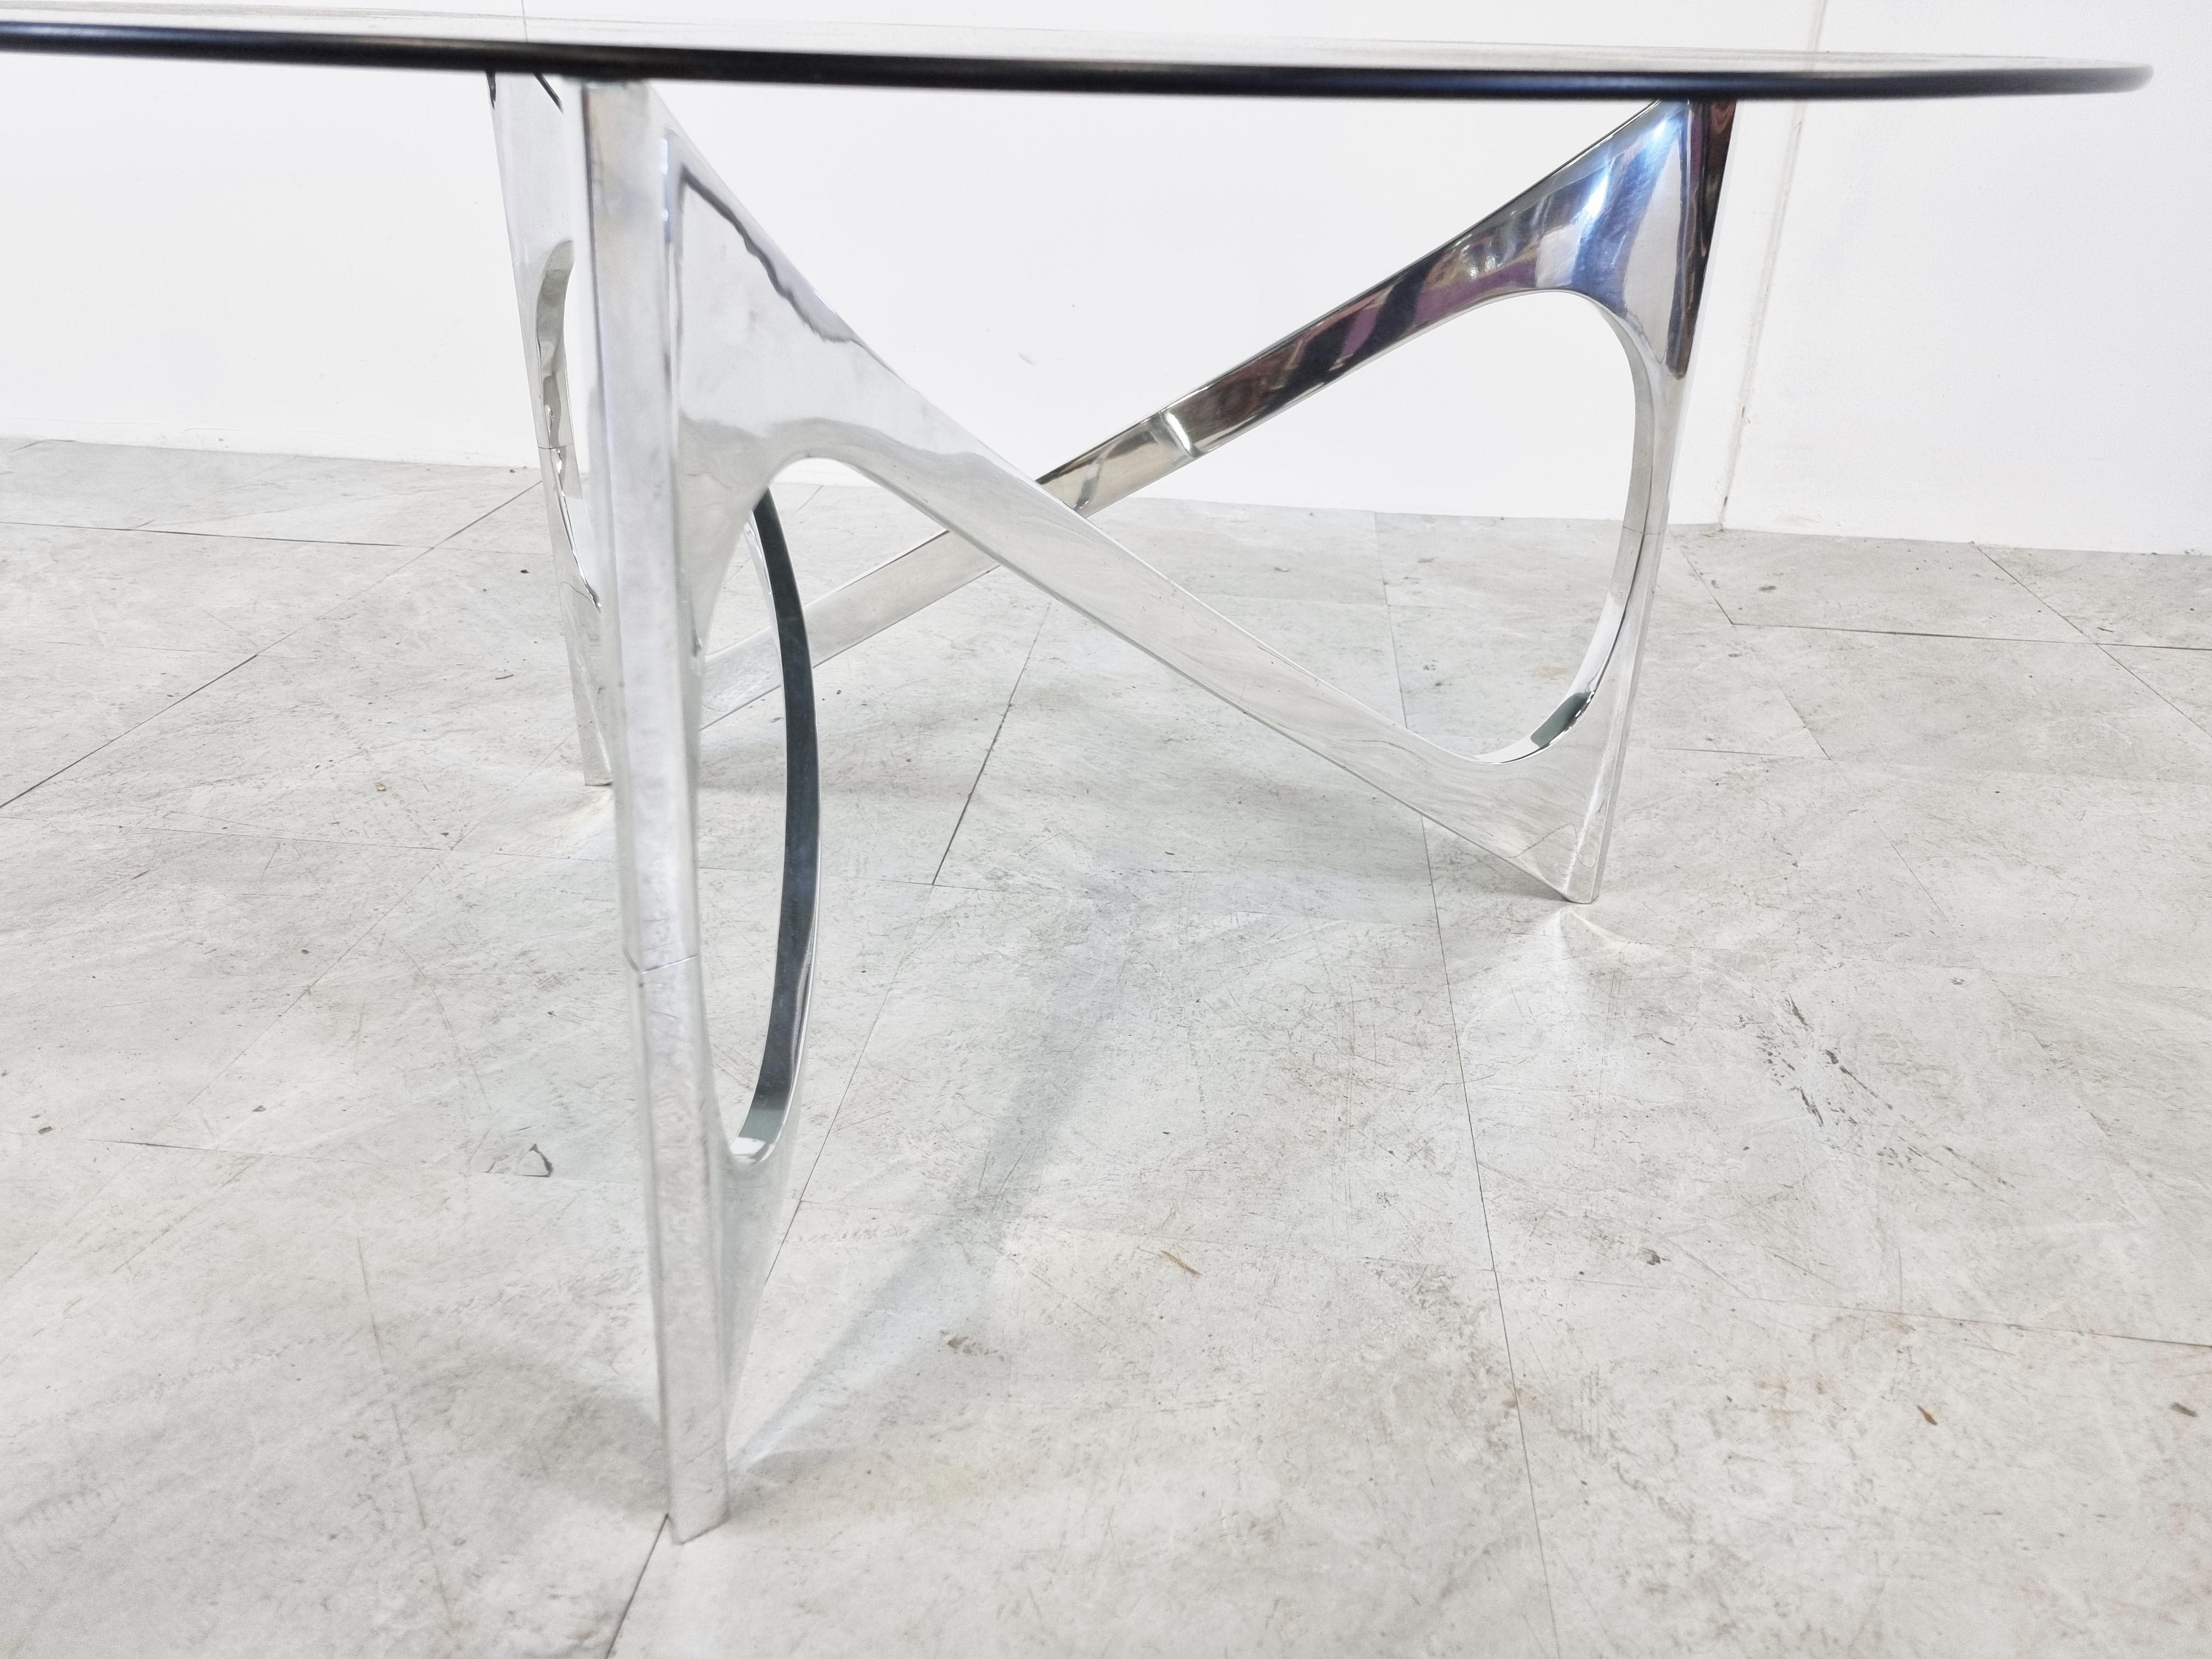 Sculptural chromed coffee table by Knut Hesterberg for Ronald Schmitt

Shiny chromed metal base with a smoked glass top.

Beautiful timeless design.

One of the more rare tables from Knut Hesterberg.

Good condition.

1970s-